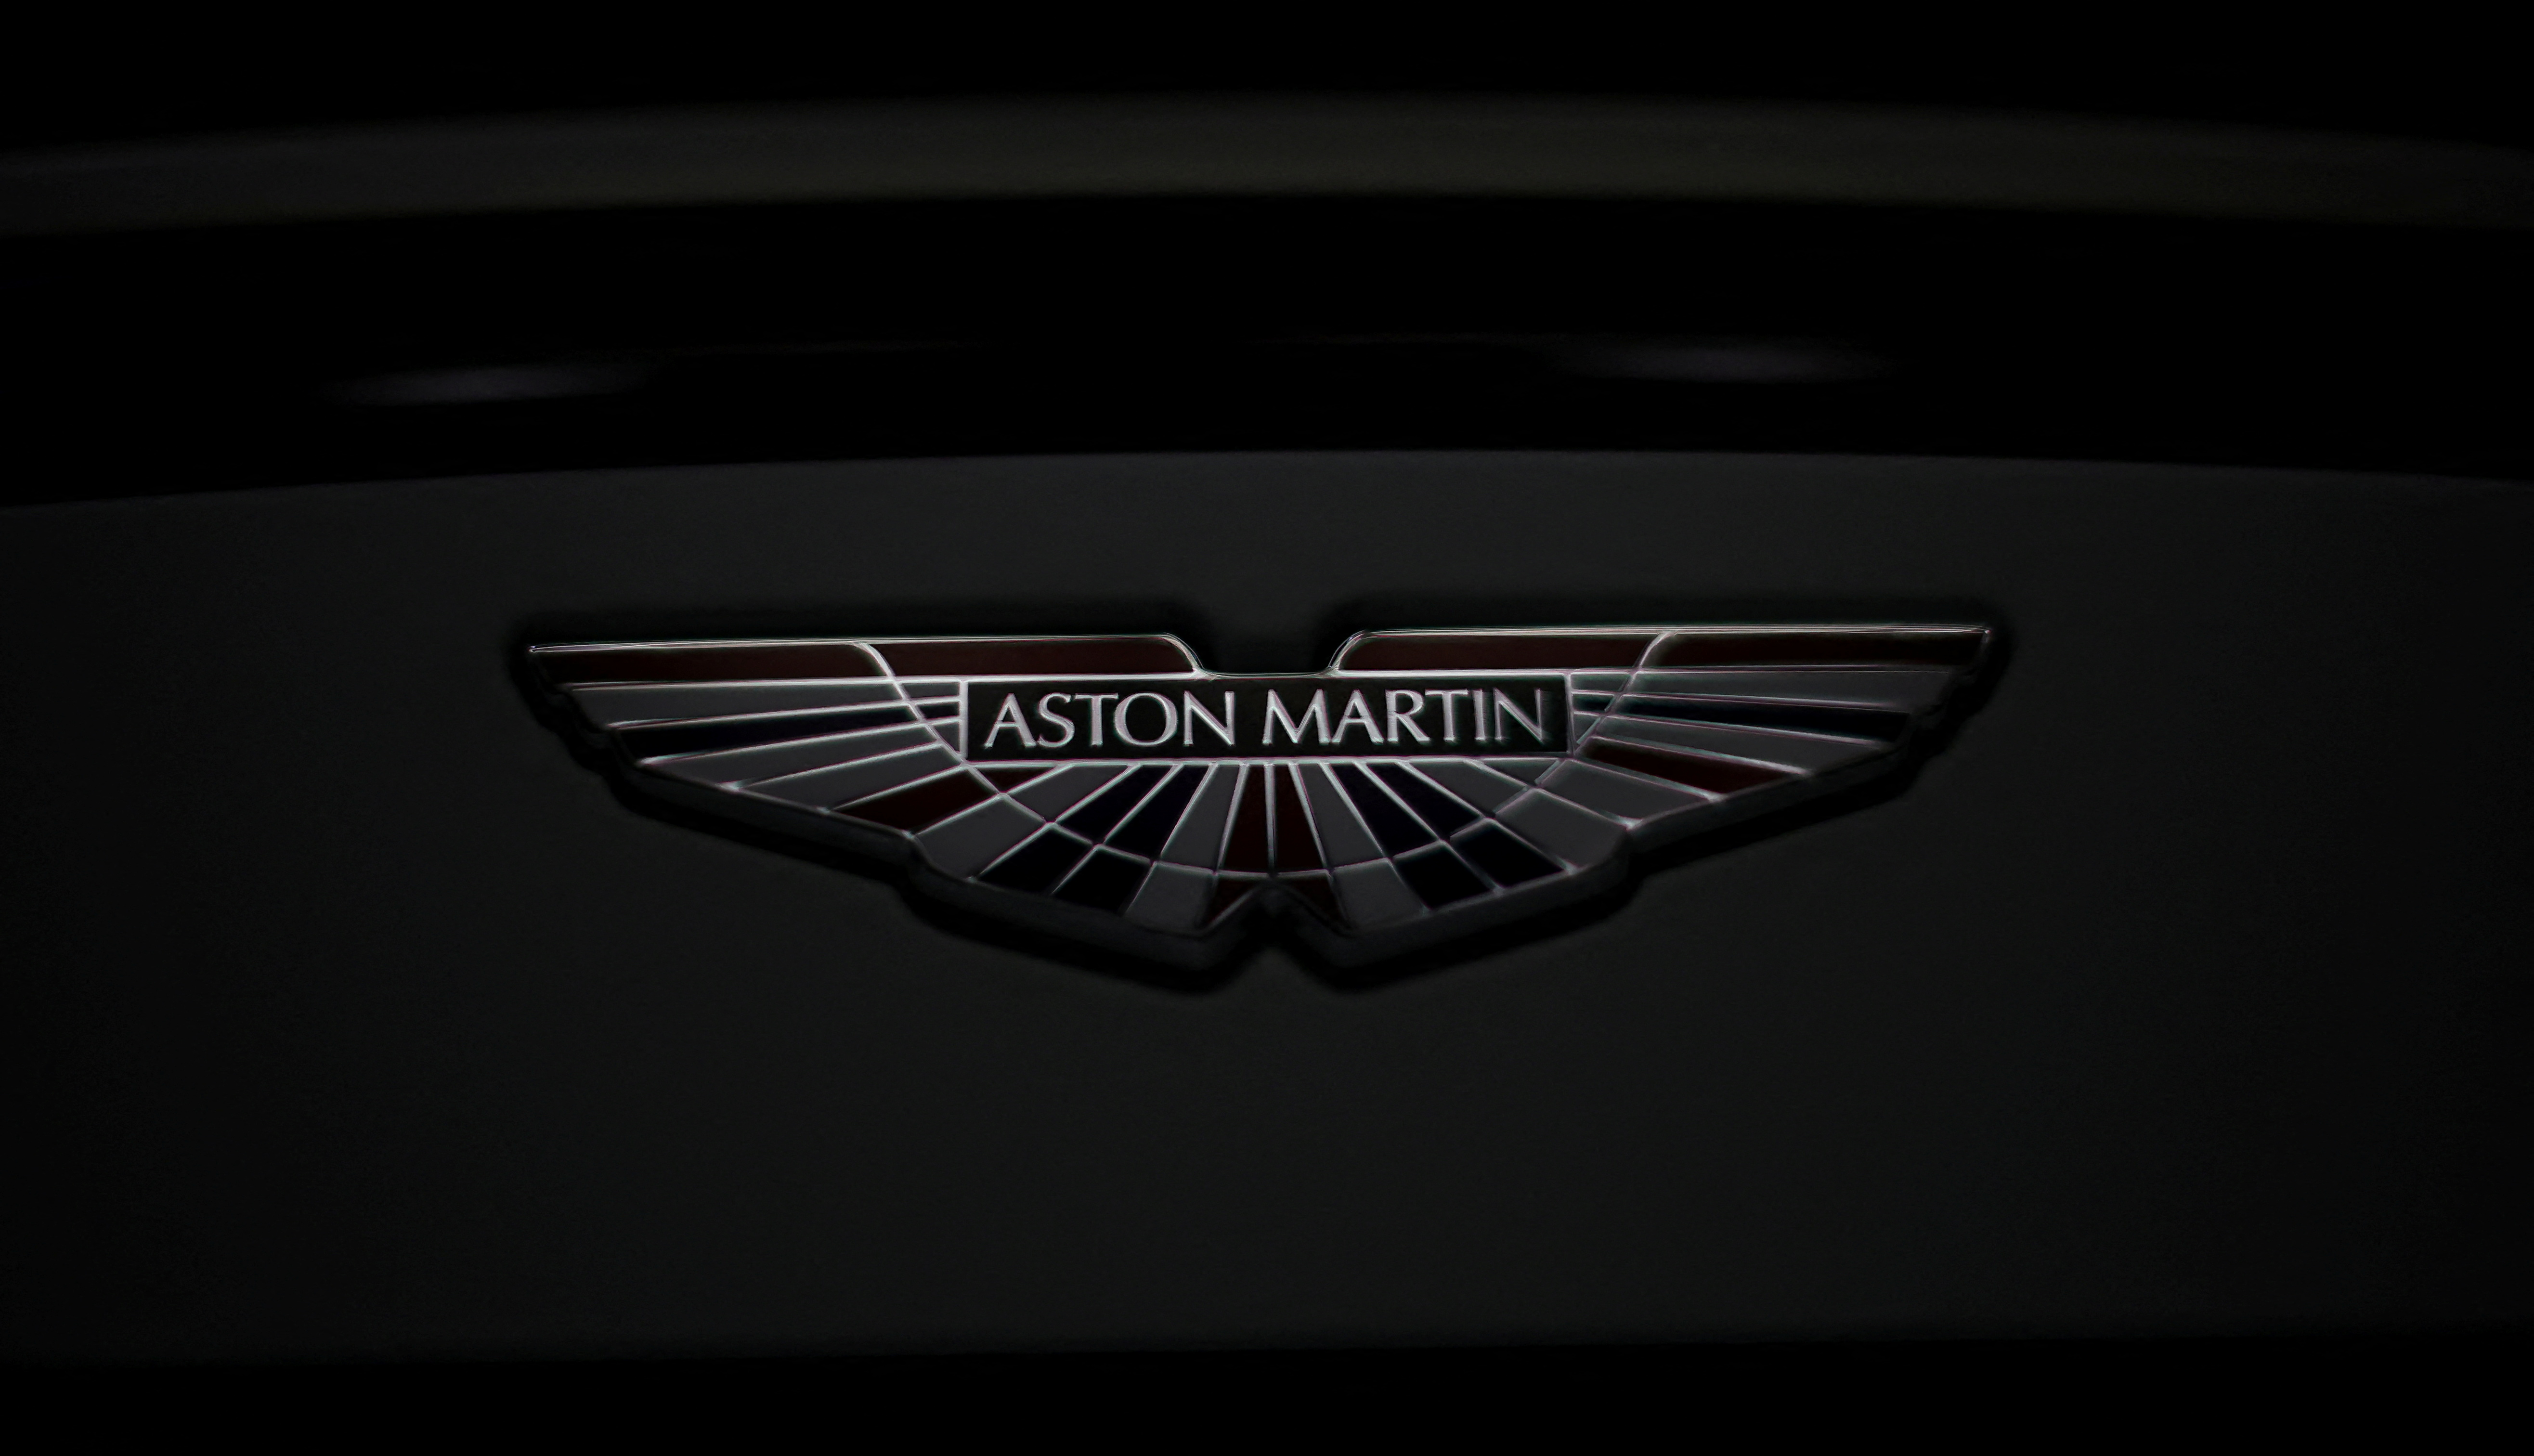 The Aston Martin logo is seen on a V12 Vantage car at the company’s factory in Gaydon